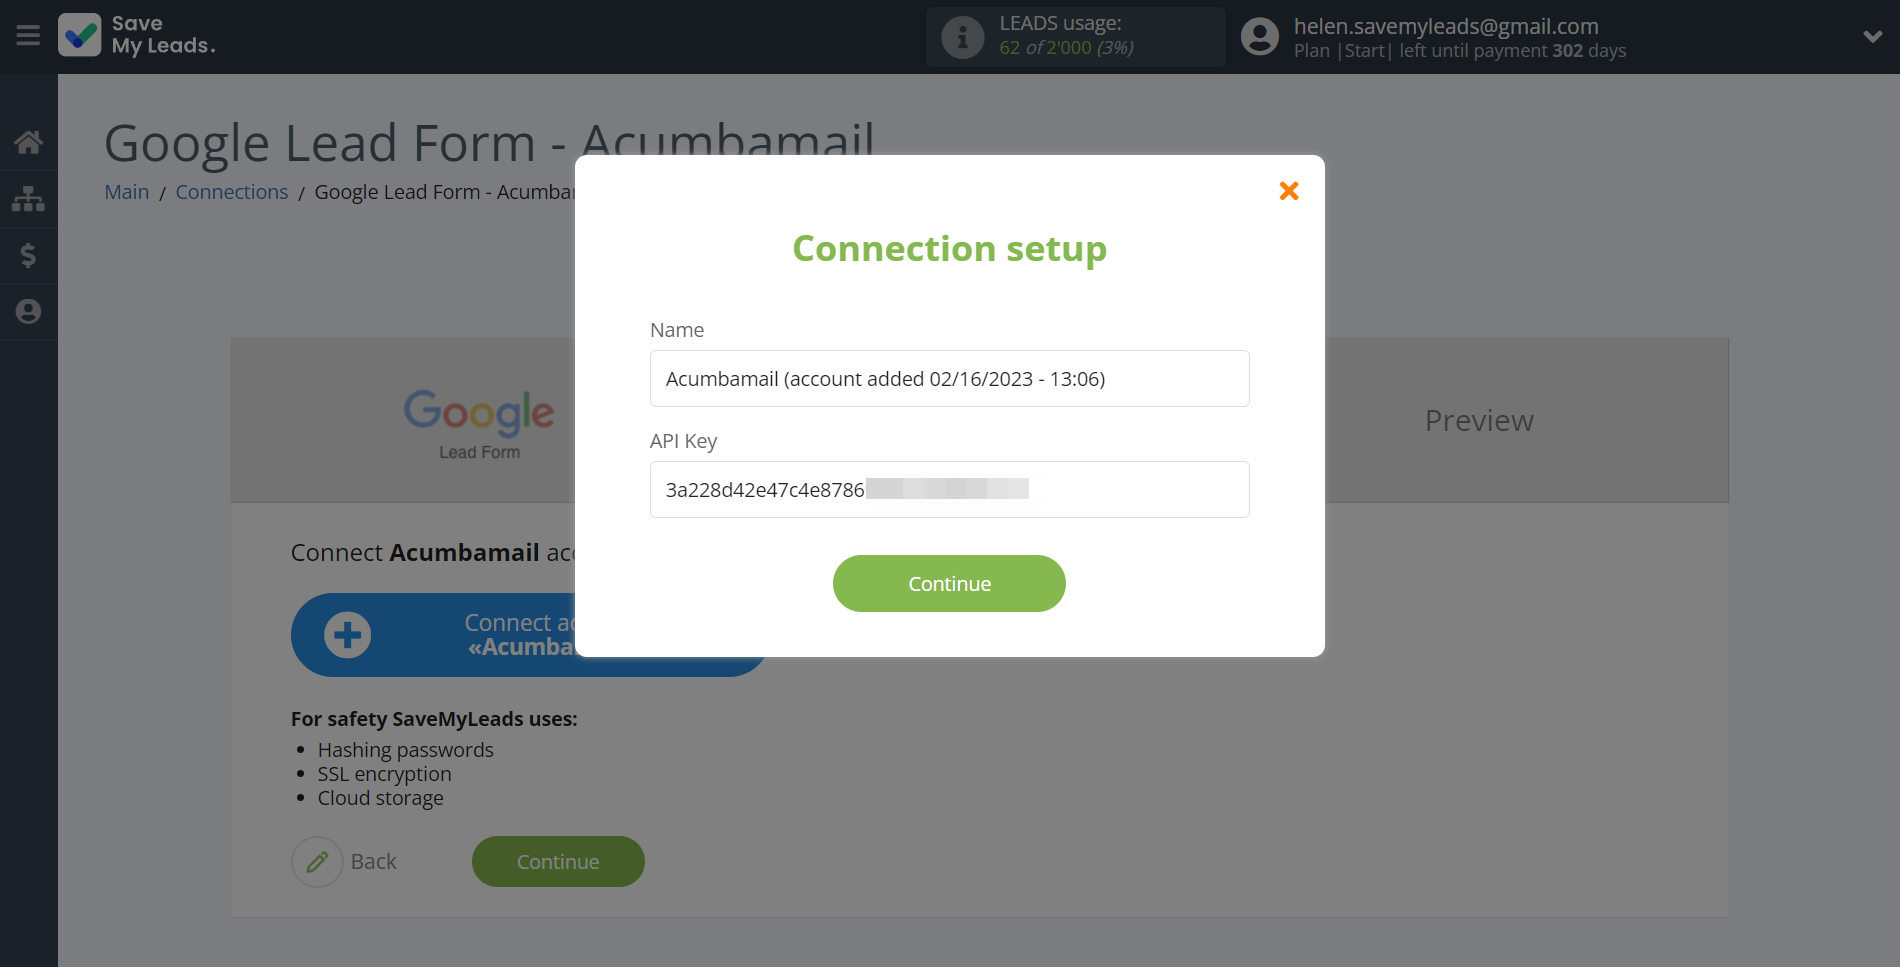 How to Connect Google Lead Form with Acumbamail Send SMS | Data Destination account connection